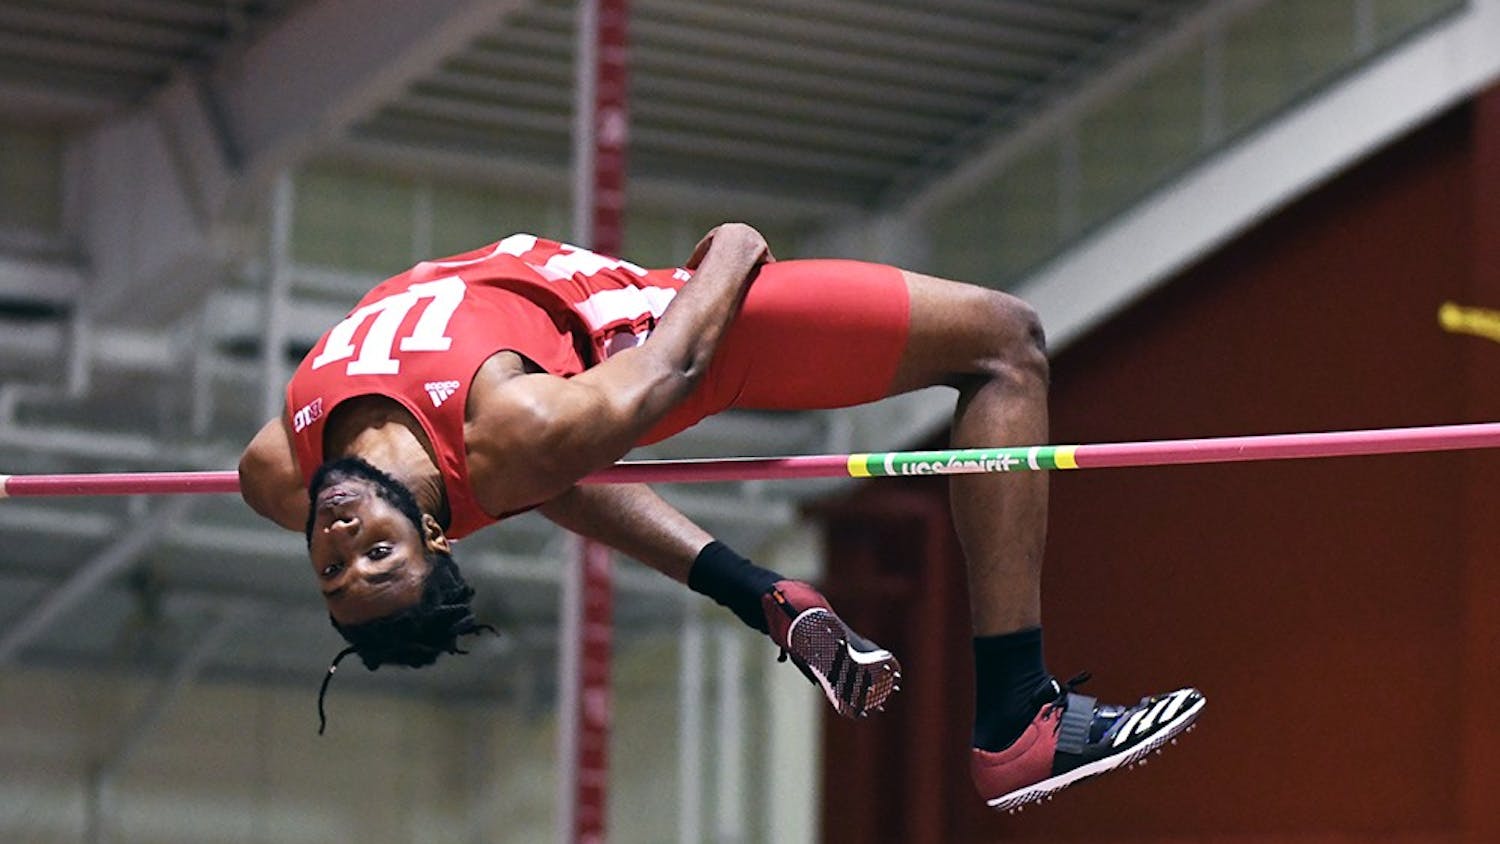 Freshman Jyles Etienne competes in the high jump in the Hoosier Open in Harry Gladstein Fieldhouse. Etienne set a new meet record with a jump of 2.21m and was named one of IU's three Big Ten Athlete's of the Week.&nbsp;